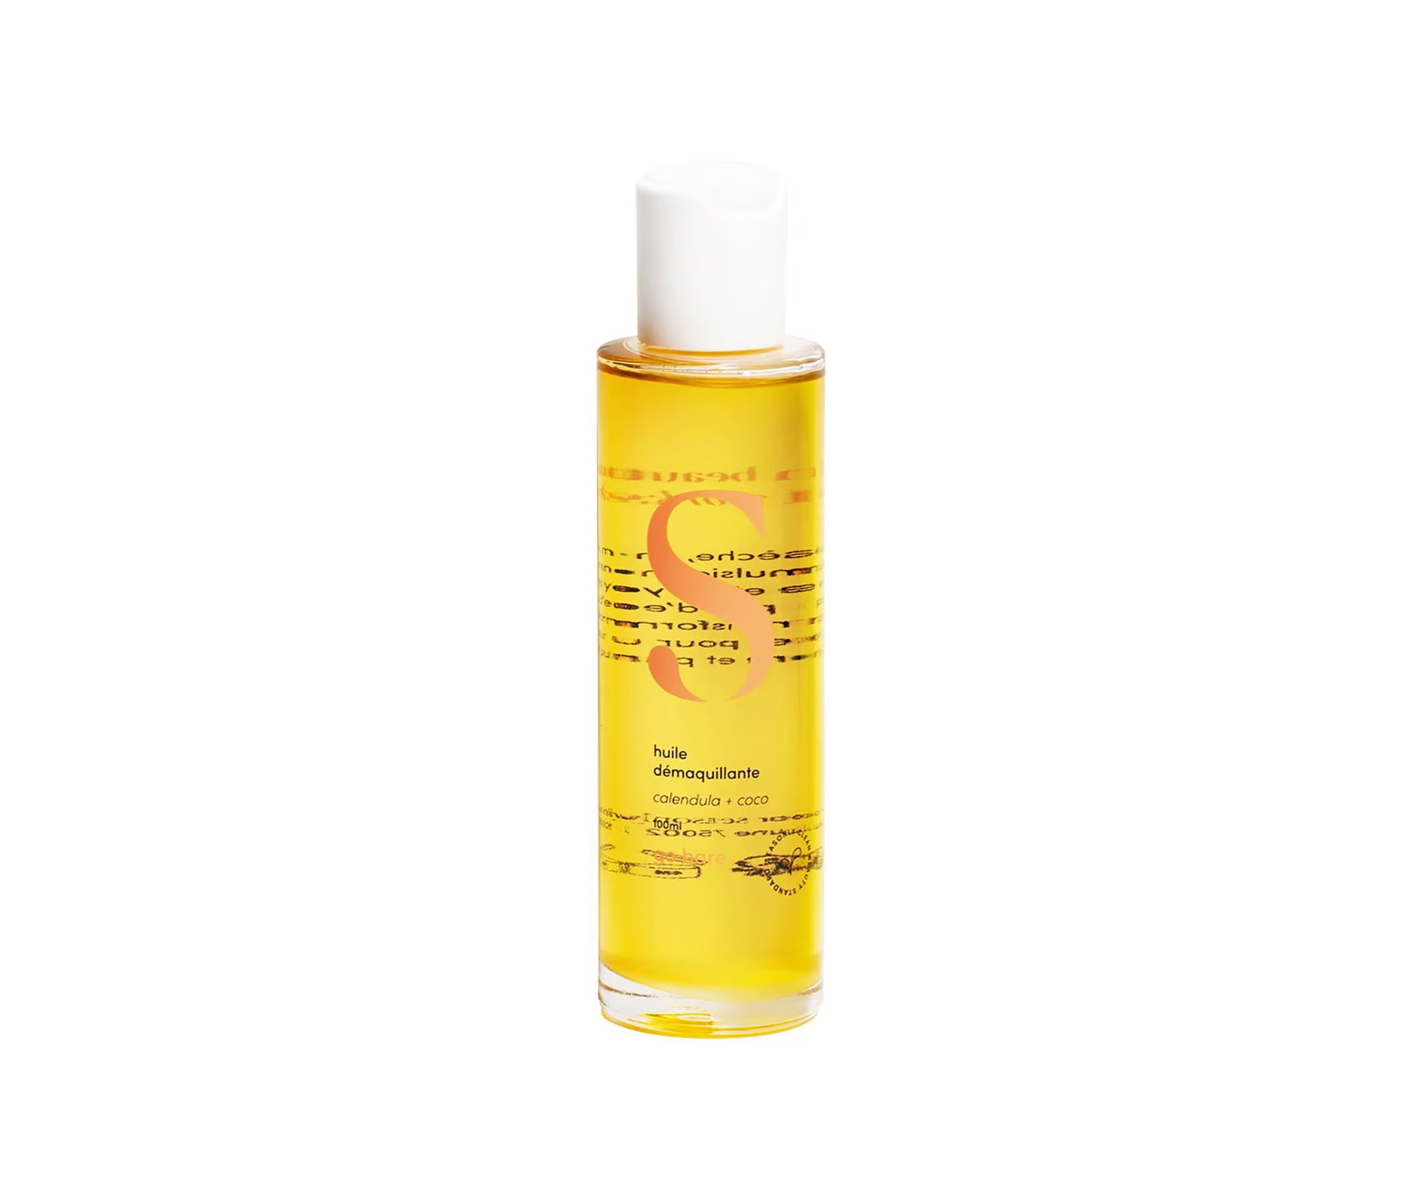 SEASONLY, Make Up Remover Oil Cleansing and Purifying Care 